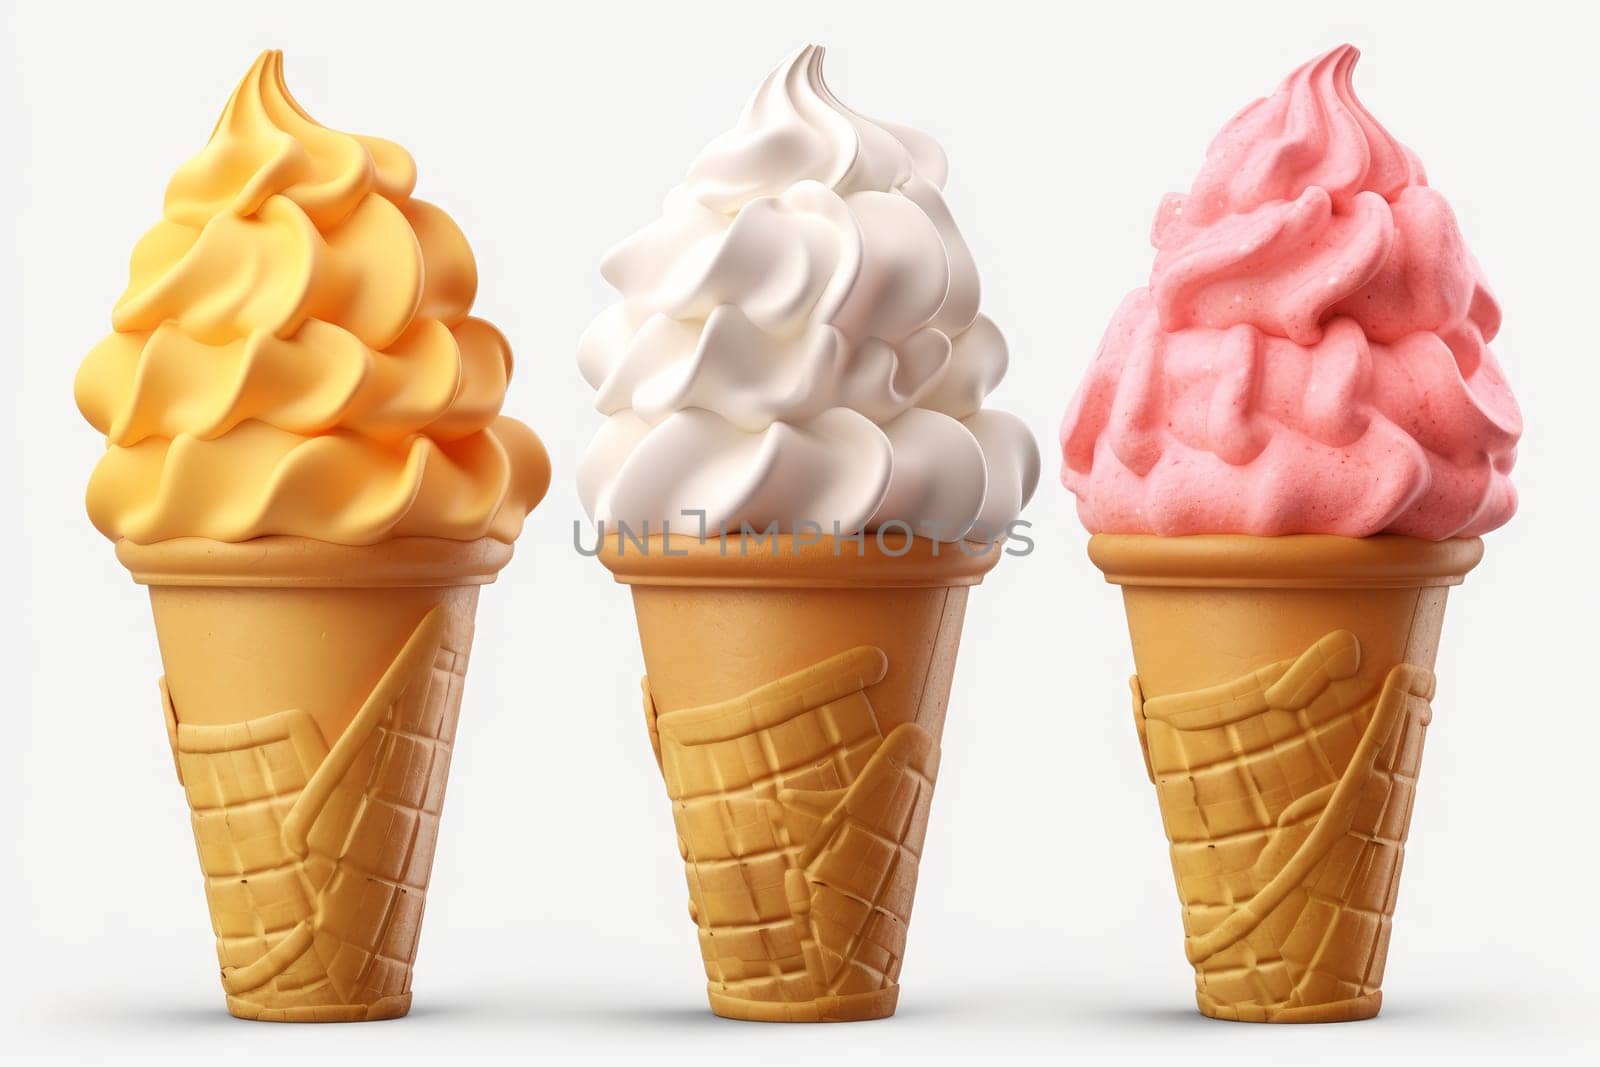 New ice cream concept by ylivdesign